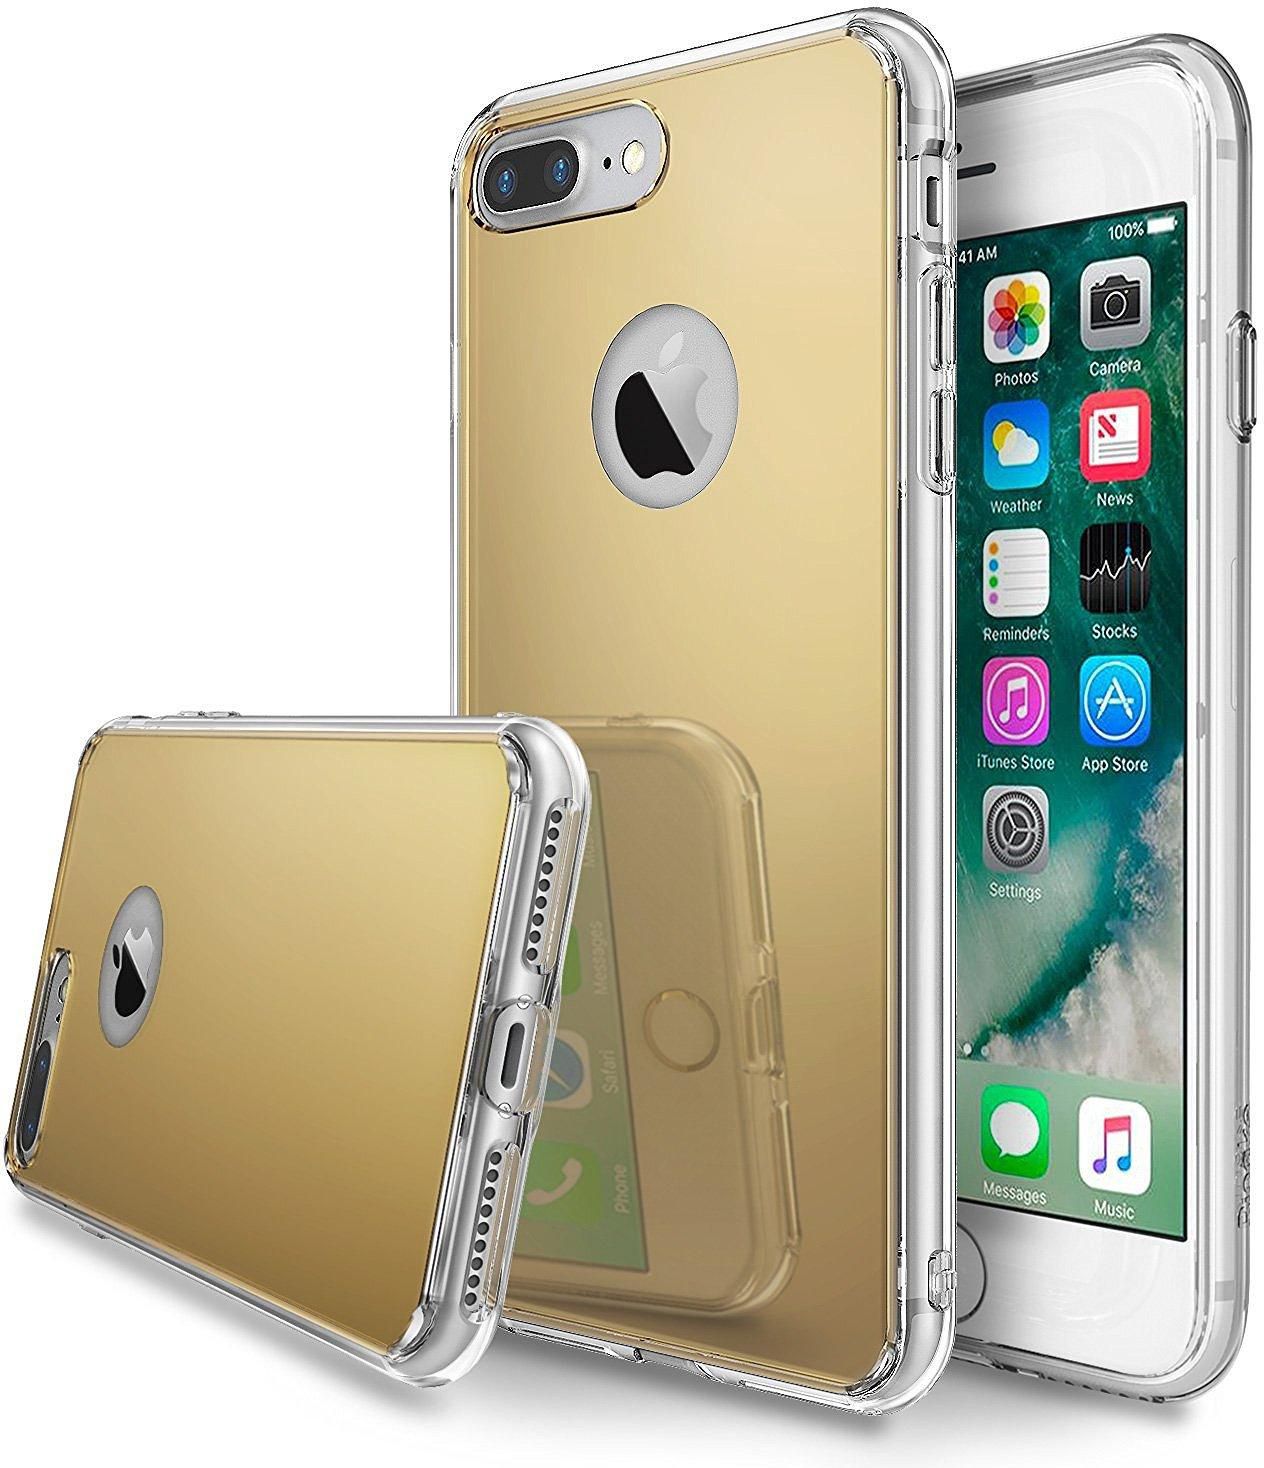 Rearth Ringke Fusion Mirror Shock Absorption Hard Case for Apple iPhone 7 Plus - Gold